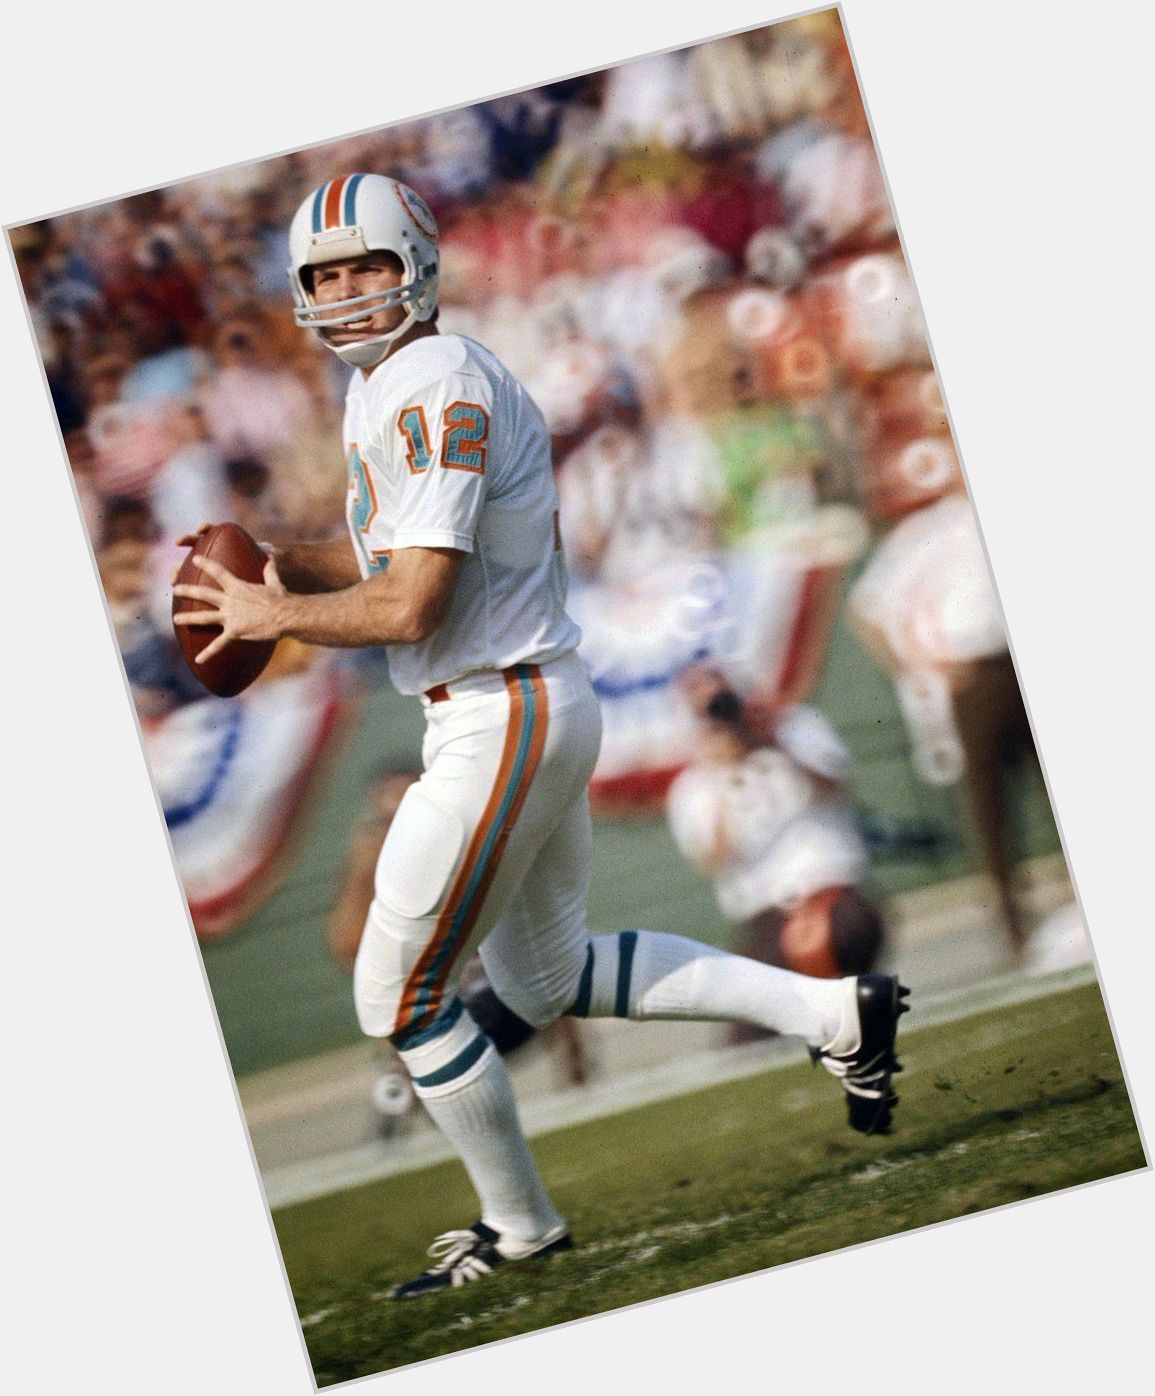 Happy Birthday to Bob Griese, who turns 74 today. 